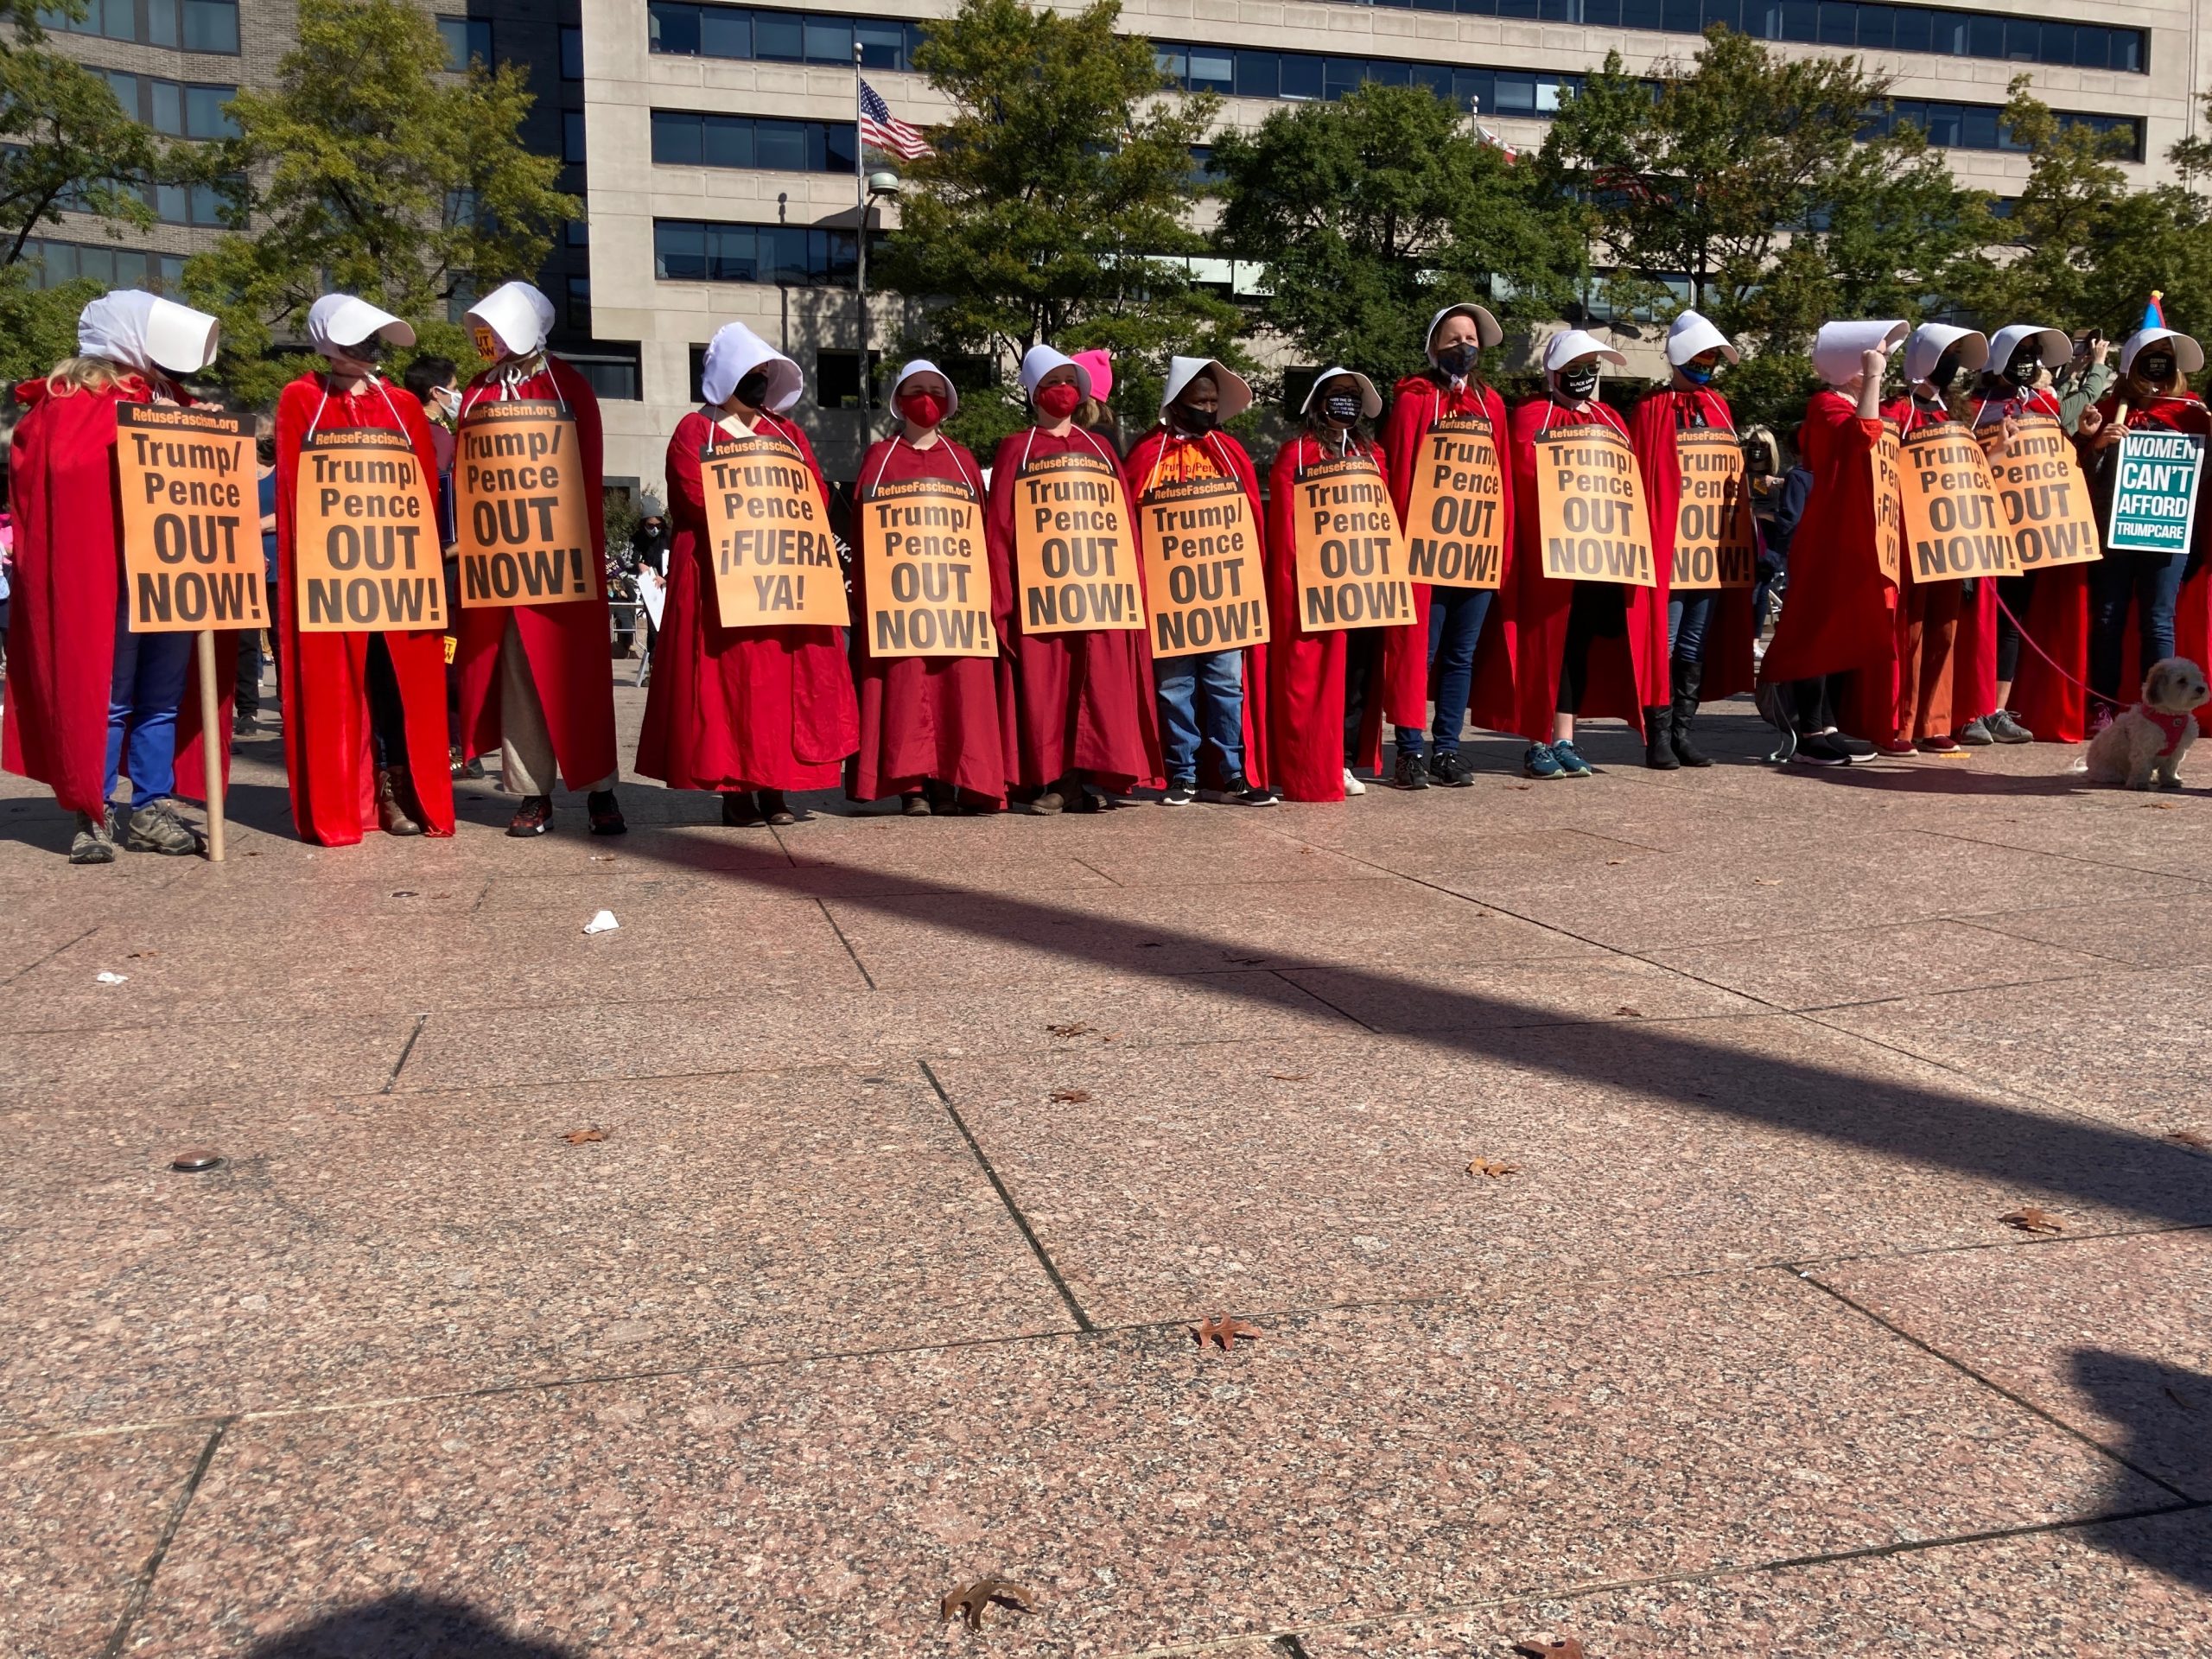 Protesters dressed as the women in Margaret Atwood's "The Handmaid's Tale" participate at the Women's March in Washington on Saturday.